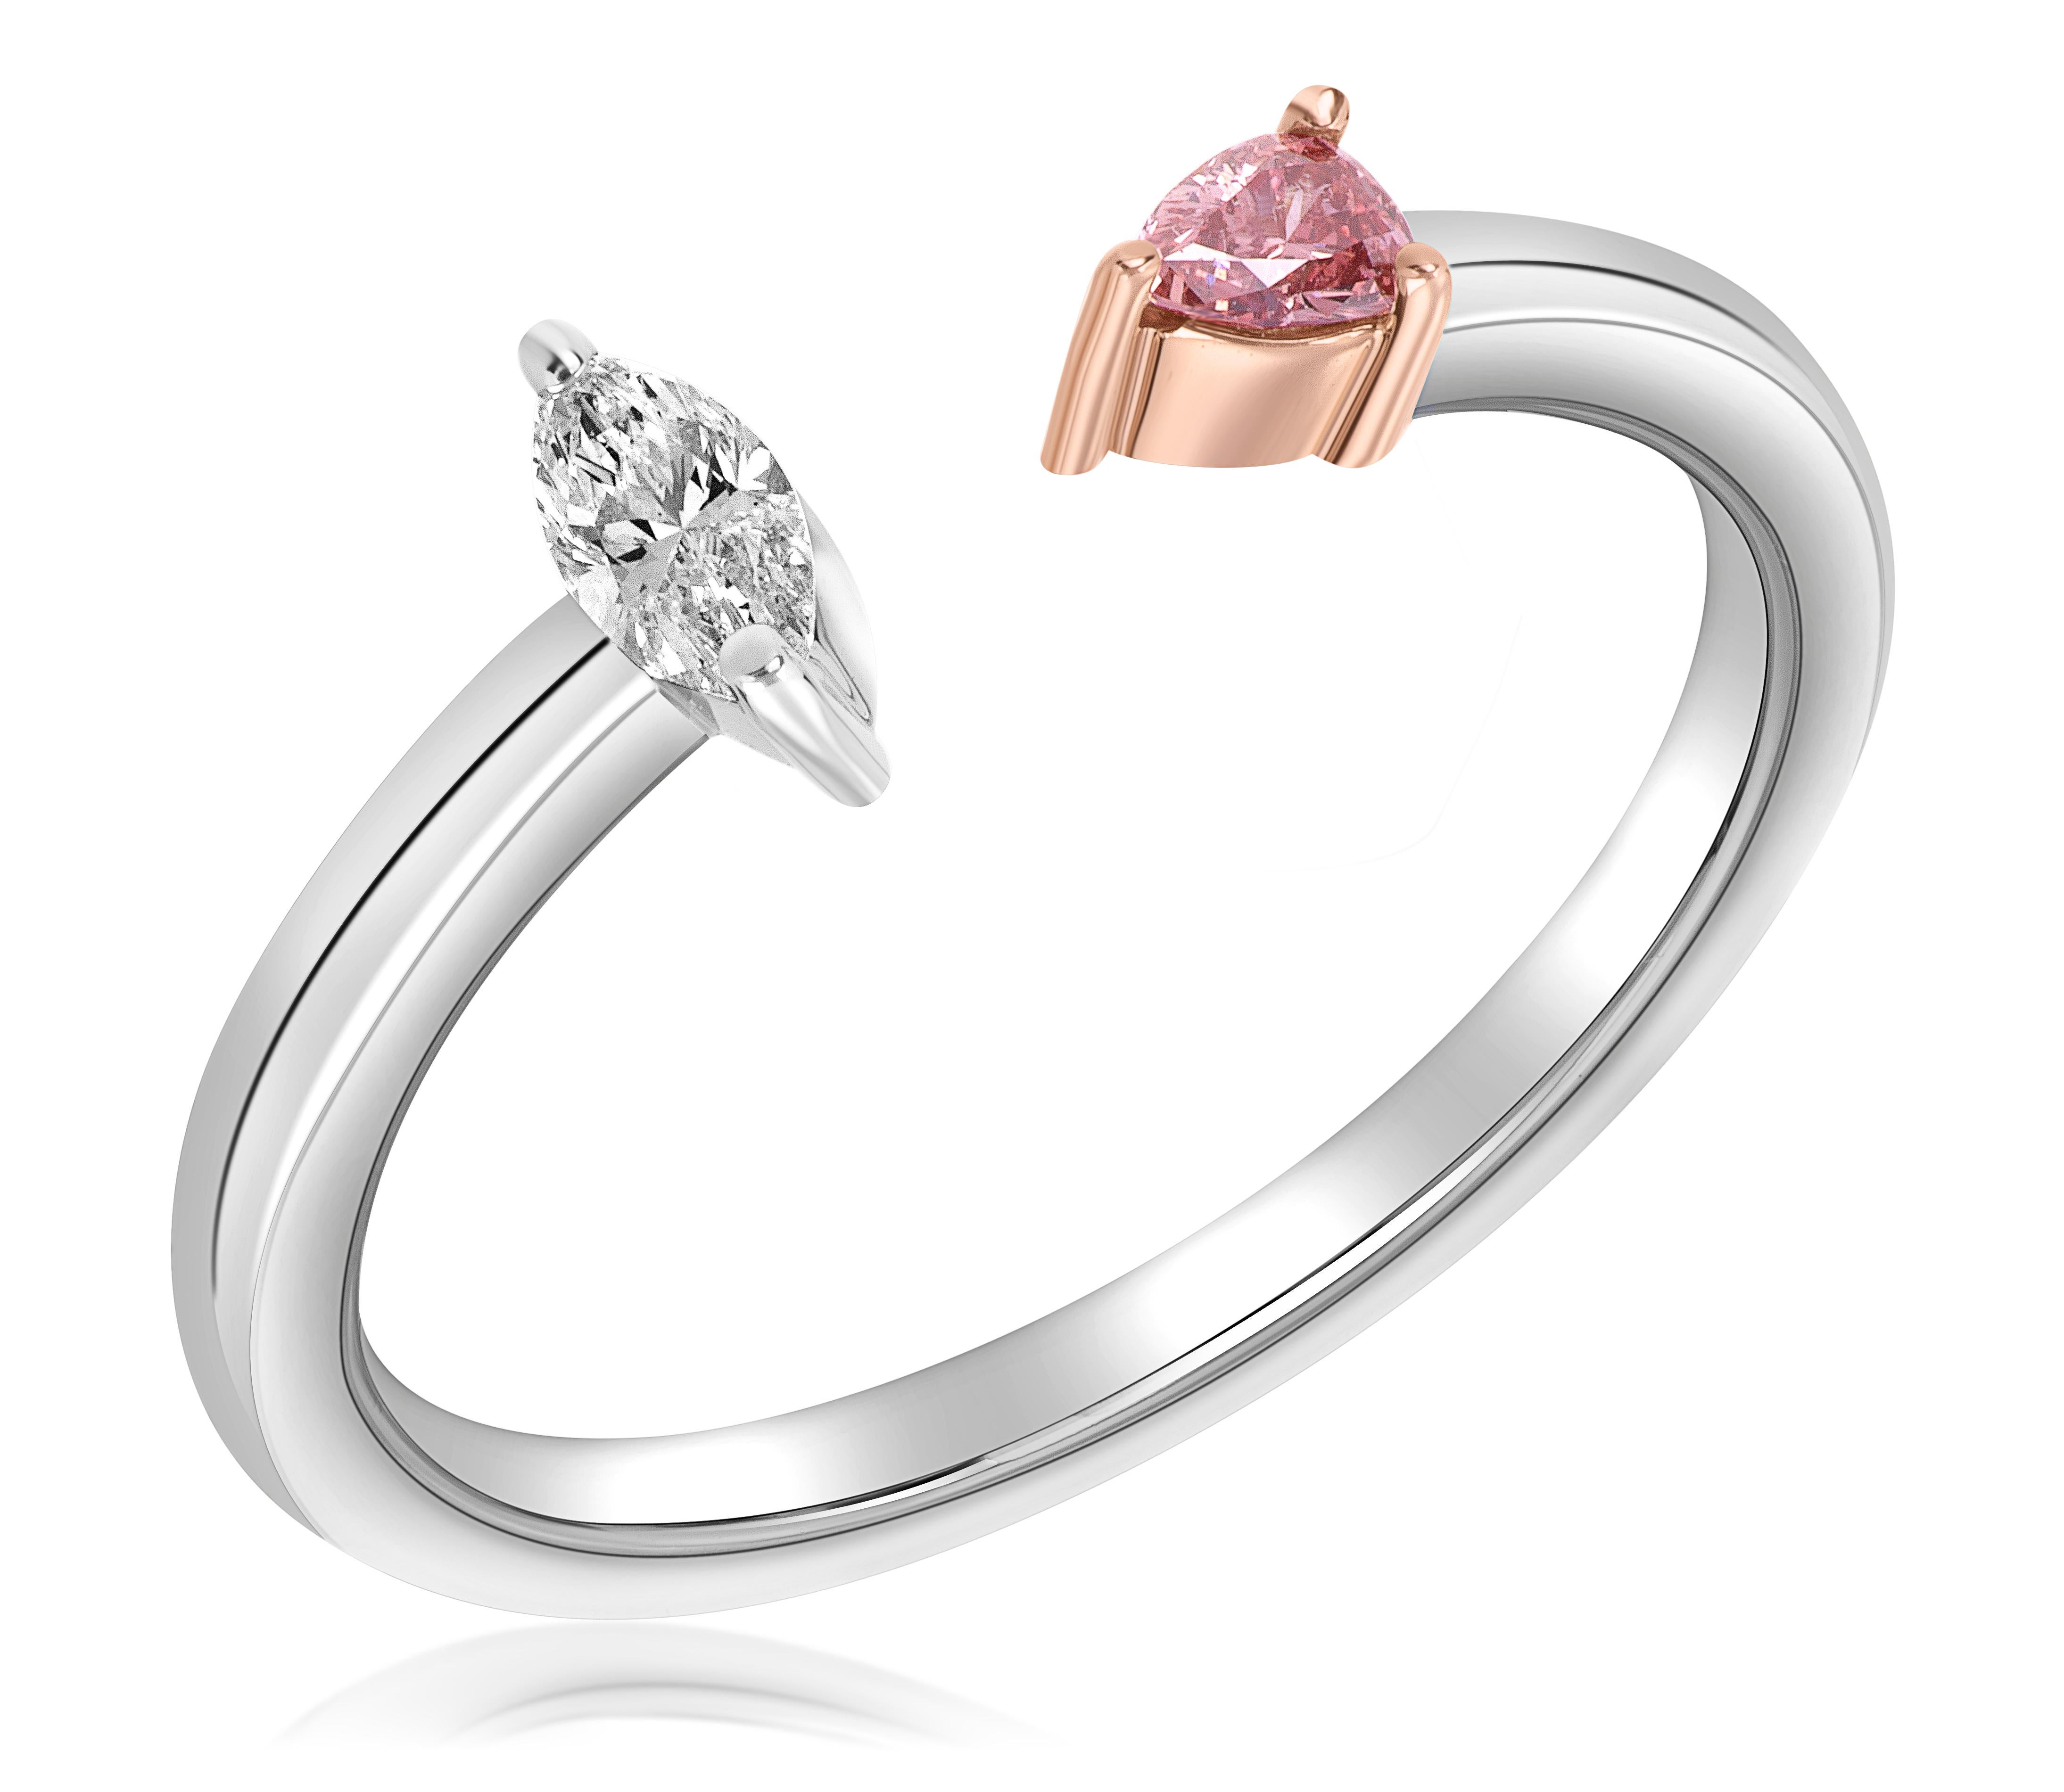 Handmade ring featuring a natural fancy deep pink pear weighing .09 carats, GIA#: 5211437481. Accented by a 0.13 F color, VS2 clarity marquise diamond. Ring size is 6.5. 